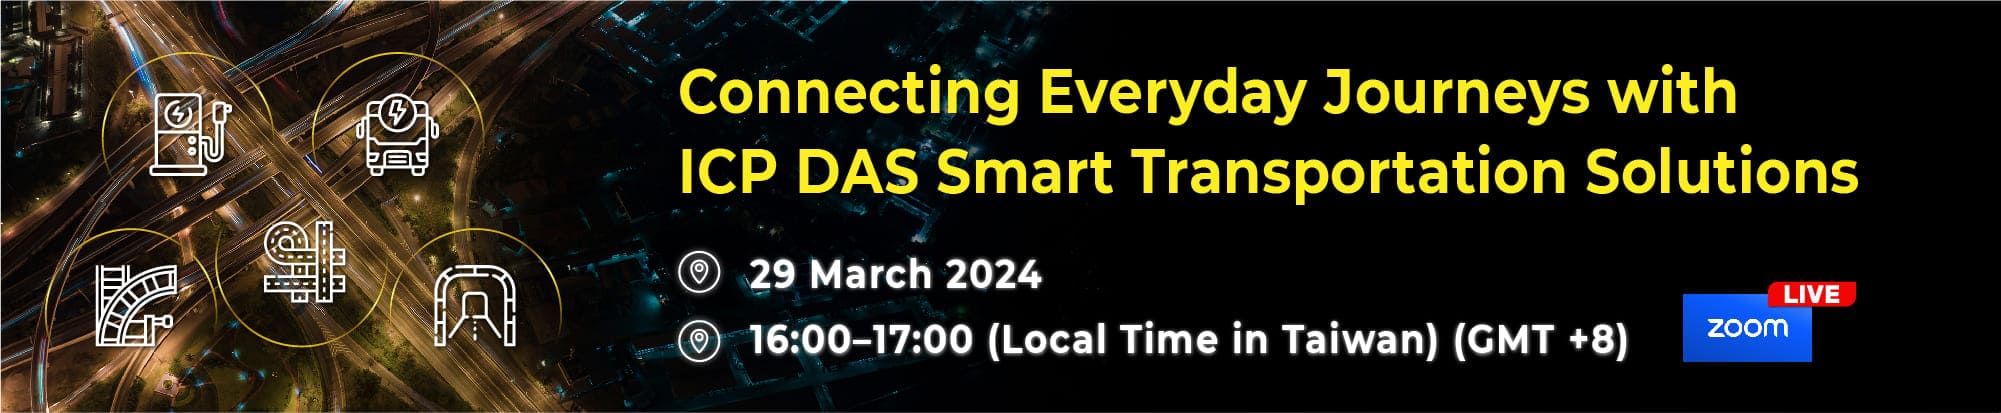 Connecting Everyday Journeys with ICP DAS Smart Transportation Solutions